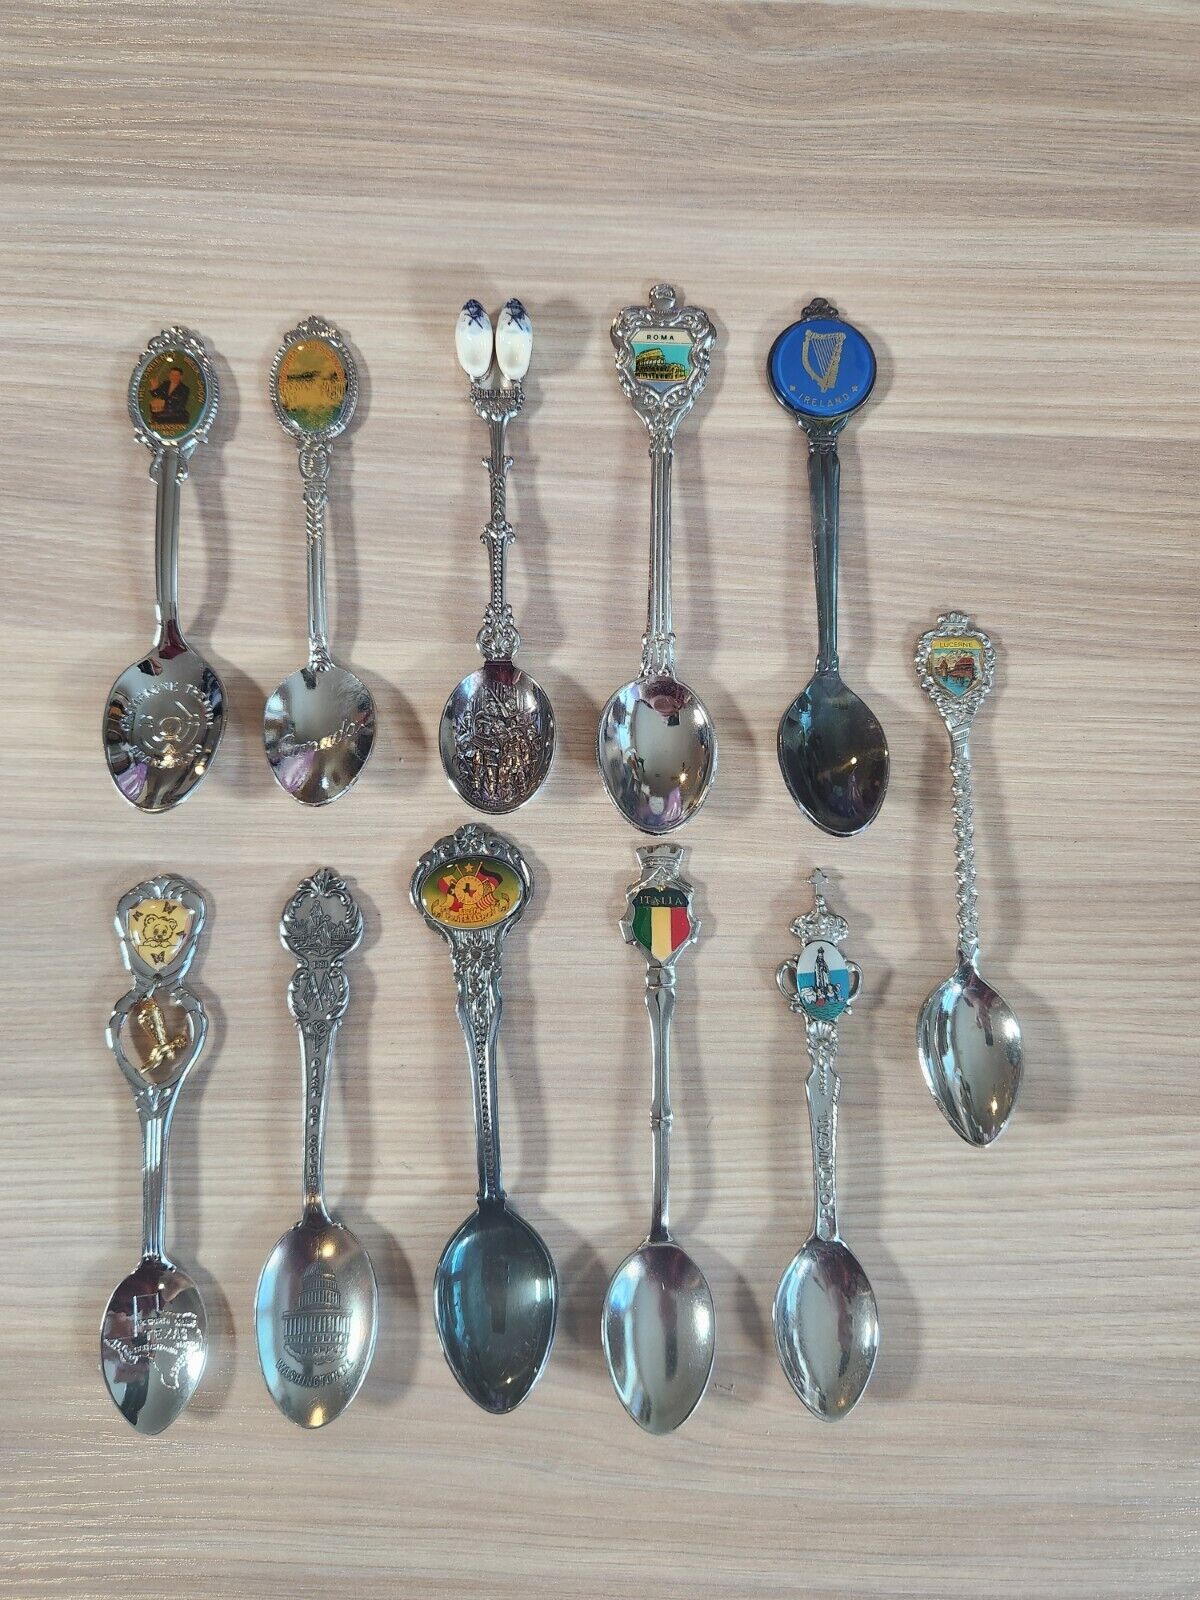 Vintage Mixed Lot of 11 Travel Souvenir Collector Spoons US Europe